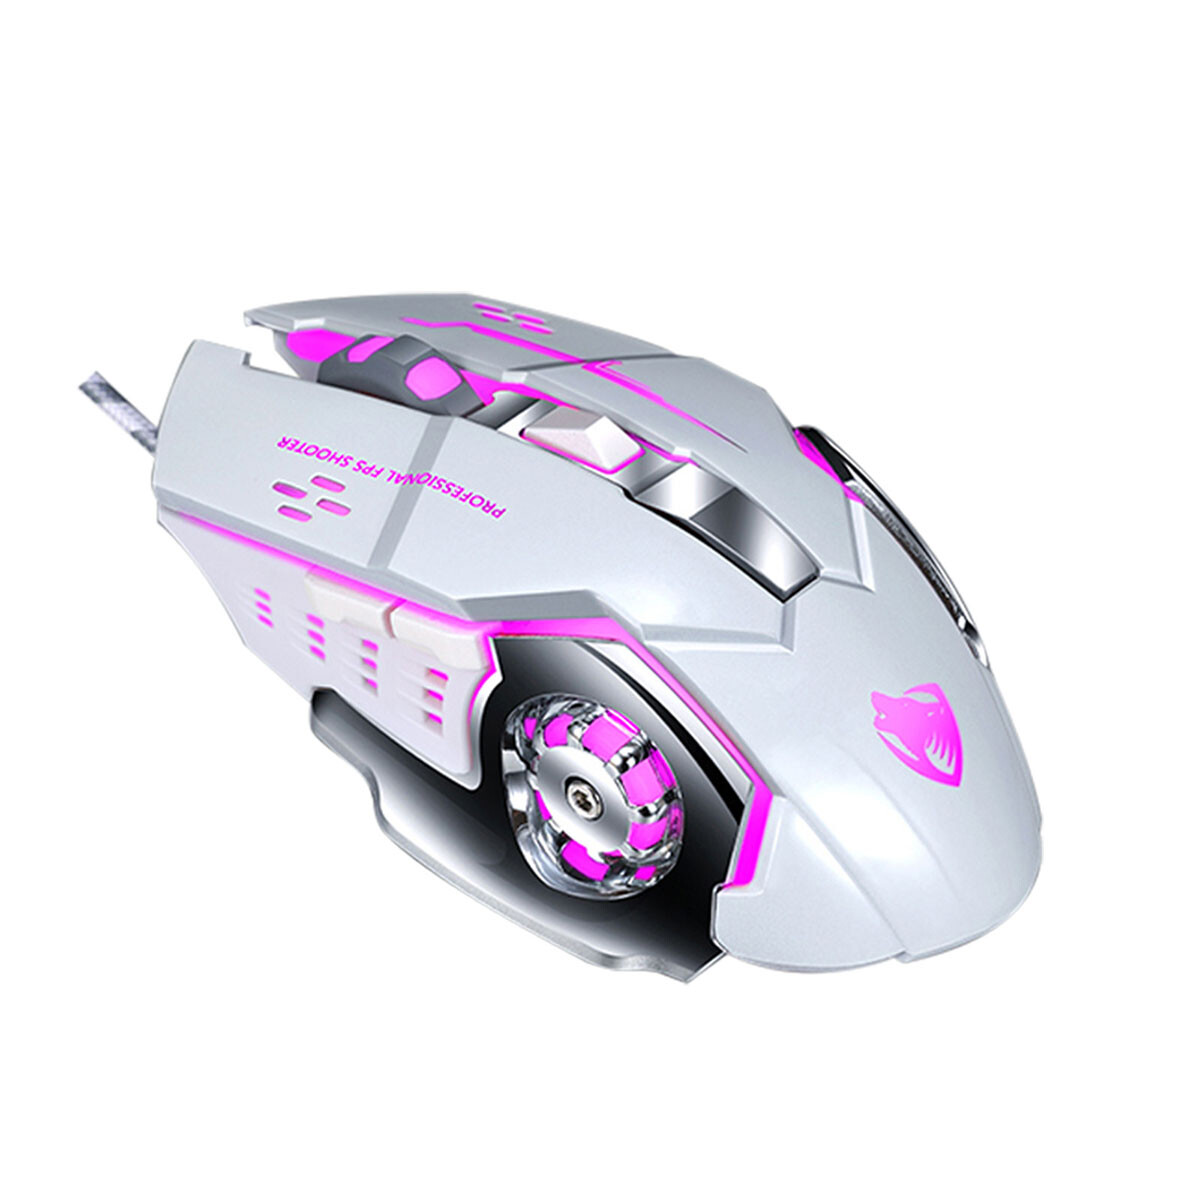 MOUSE GAMER CON CABLE TWOLF - V6 - BLANCO 